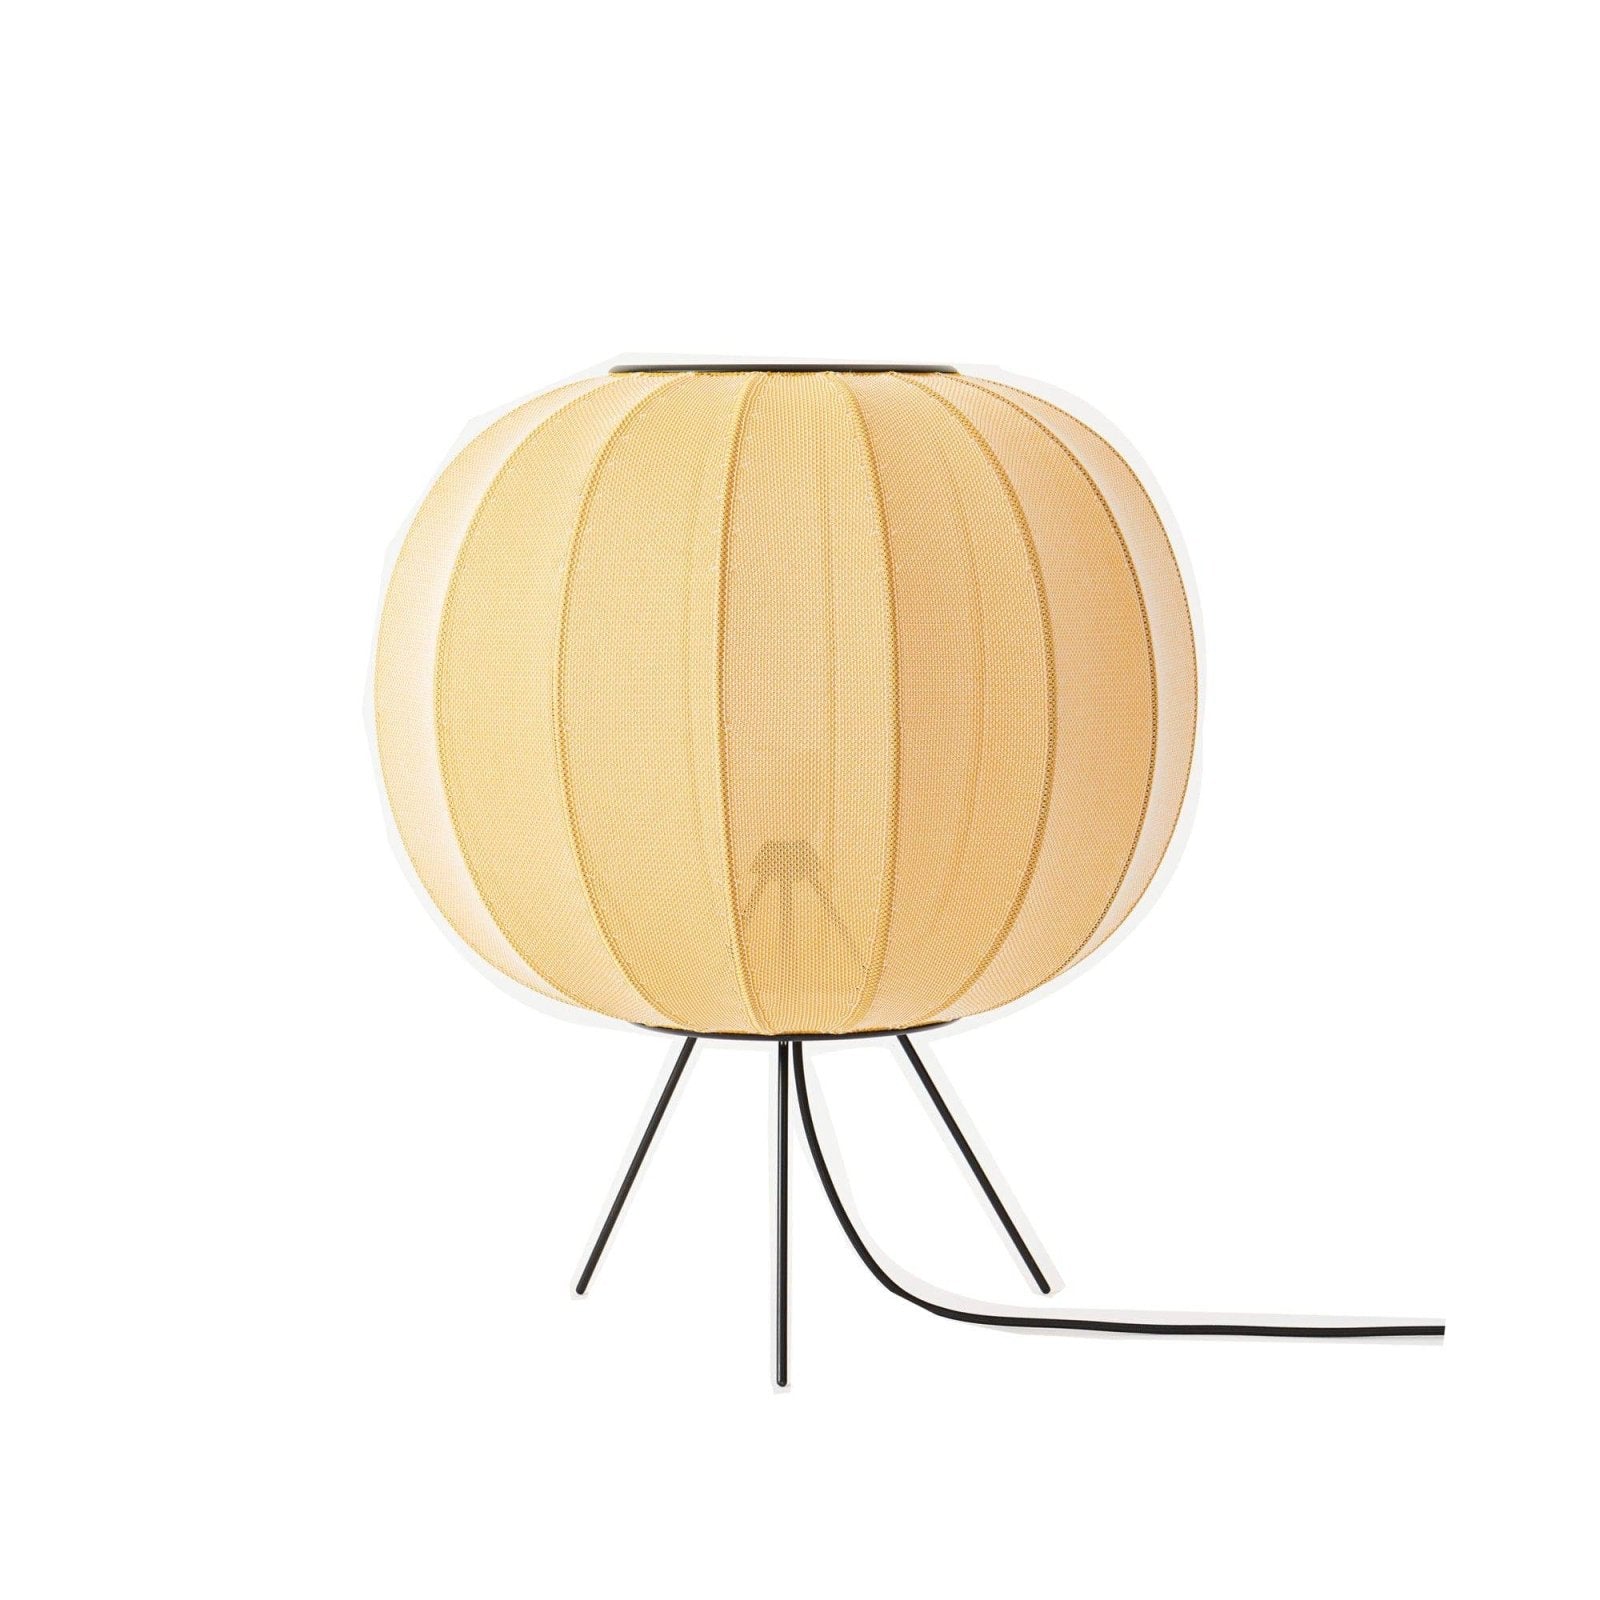 Knit-Wit Ø45 cm - Floor Low lamp by Made By Hand | Shop at Skandium London